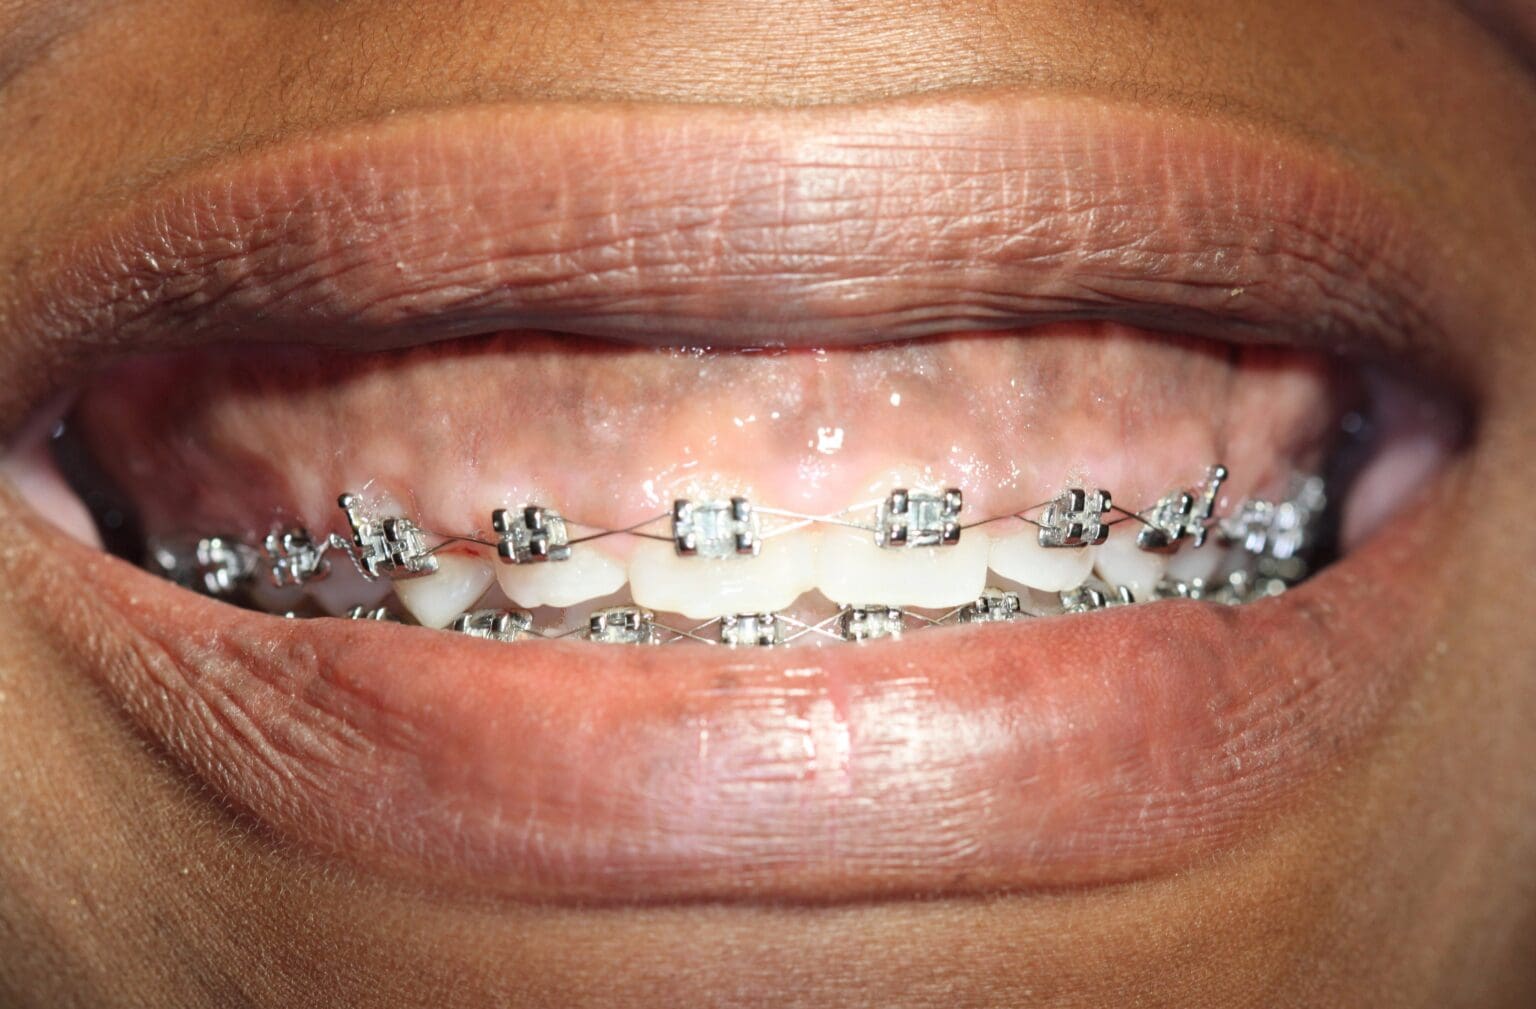 A close up of the teeth with braces on them